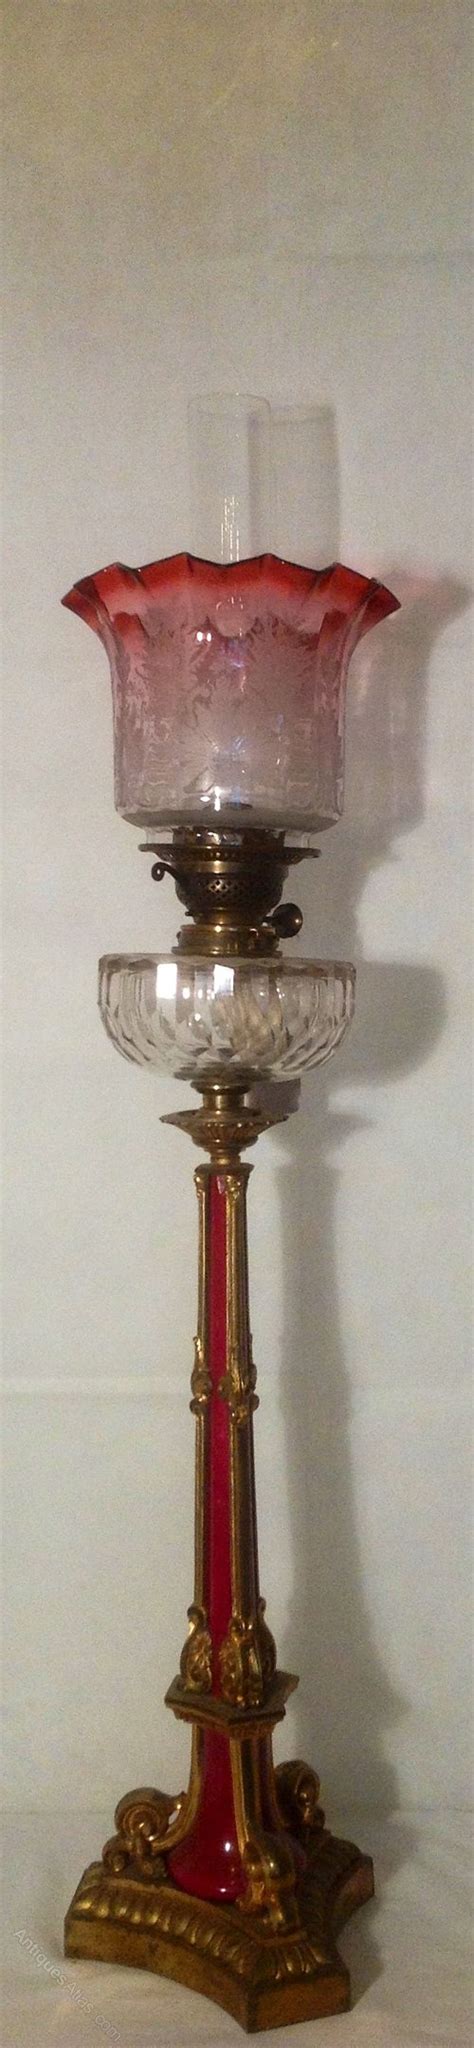 Search for antique lamps for sale. Antiques Atlas - Top Quality Oil Lamp